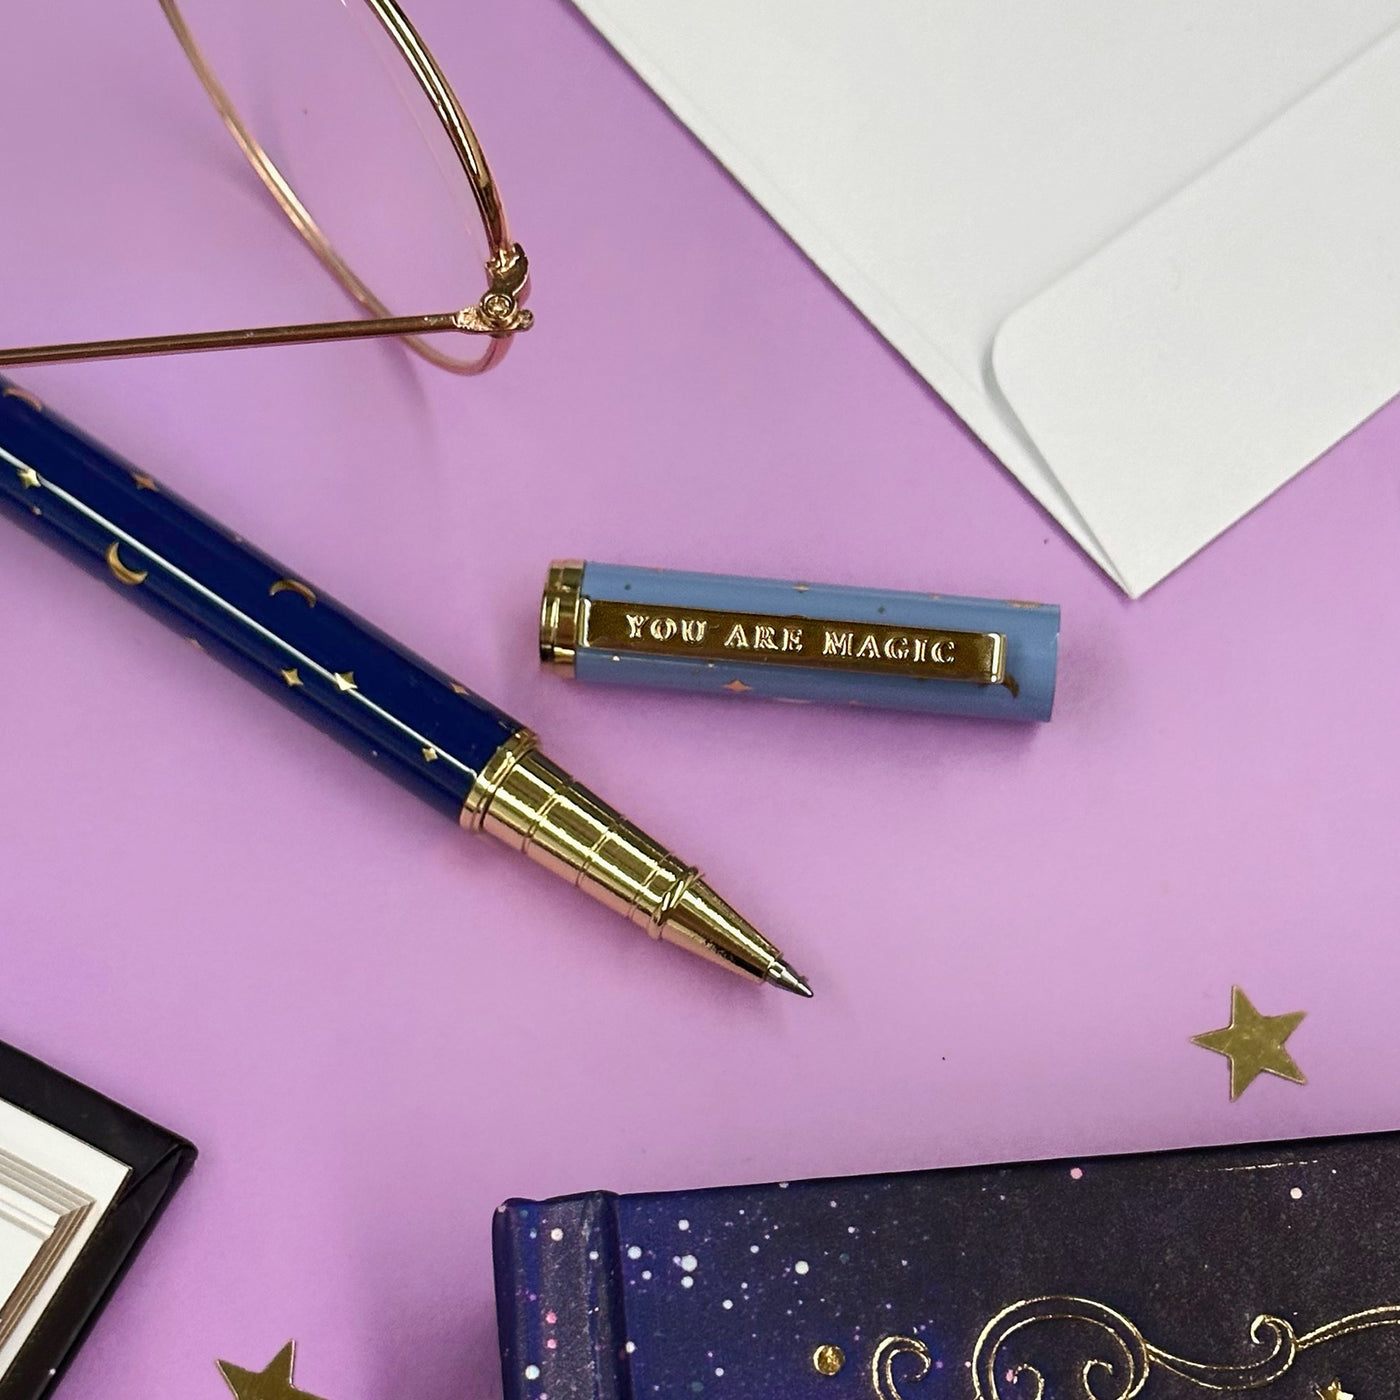 You are Magic Pen Navy - Set of 3